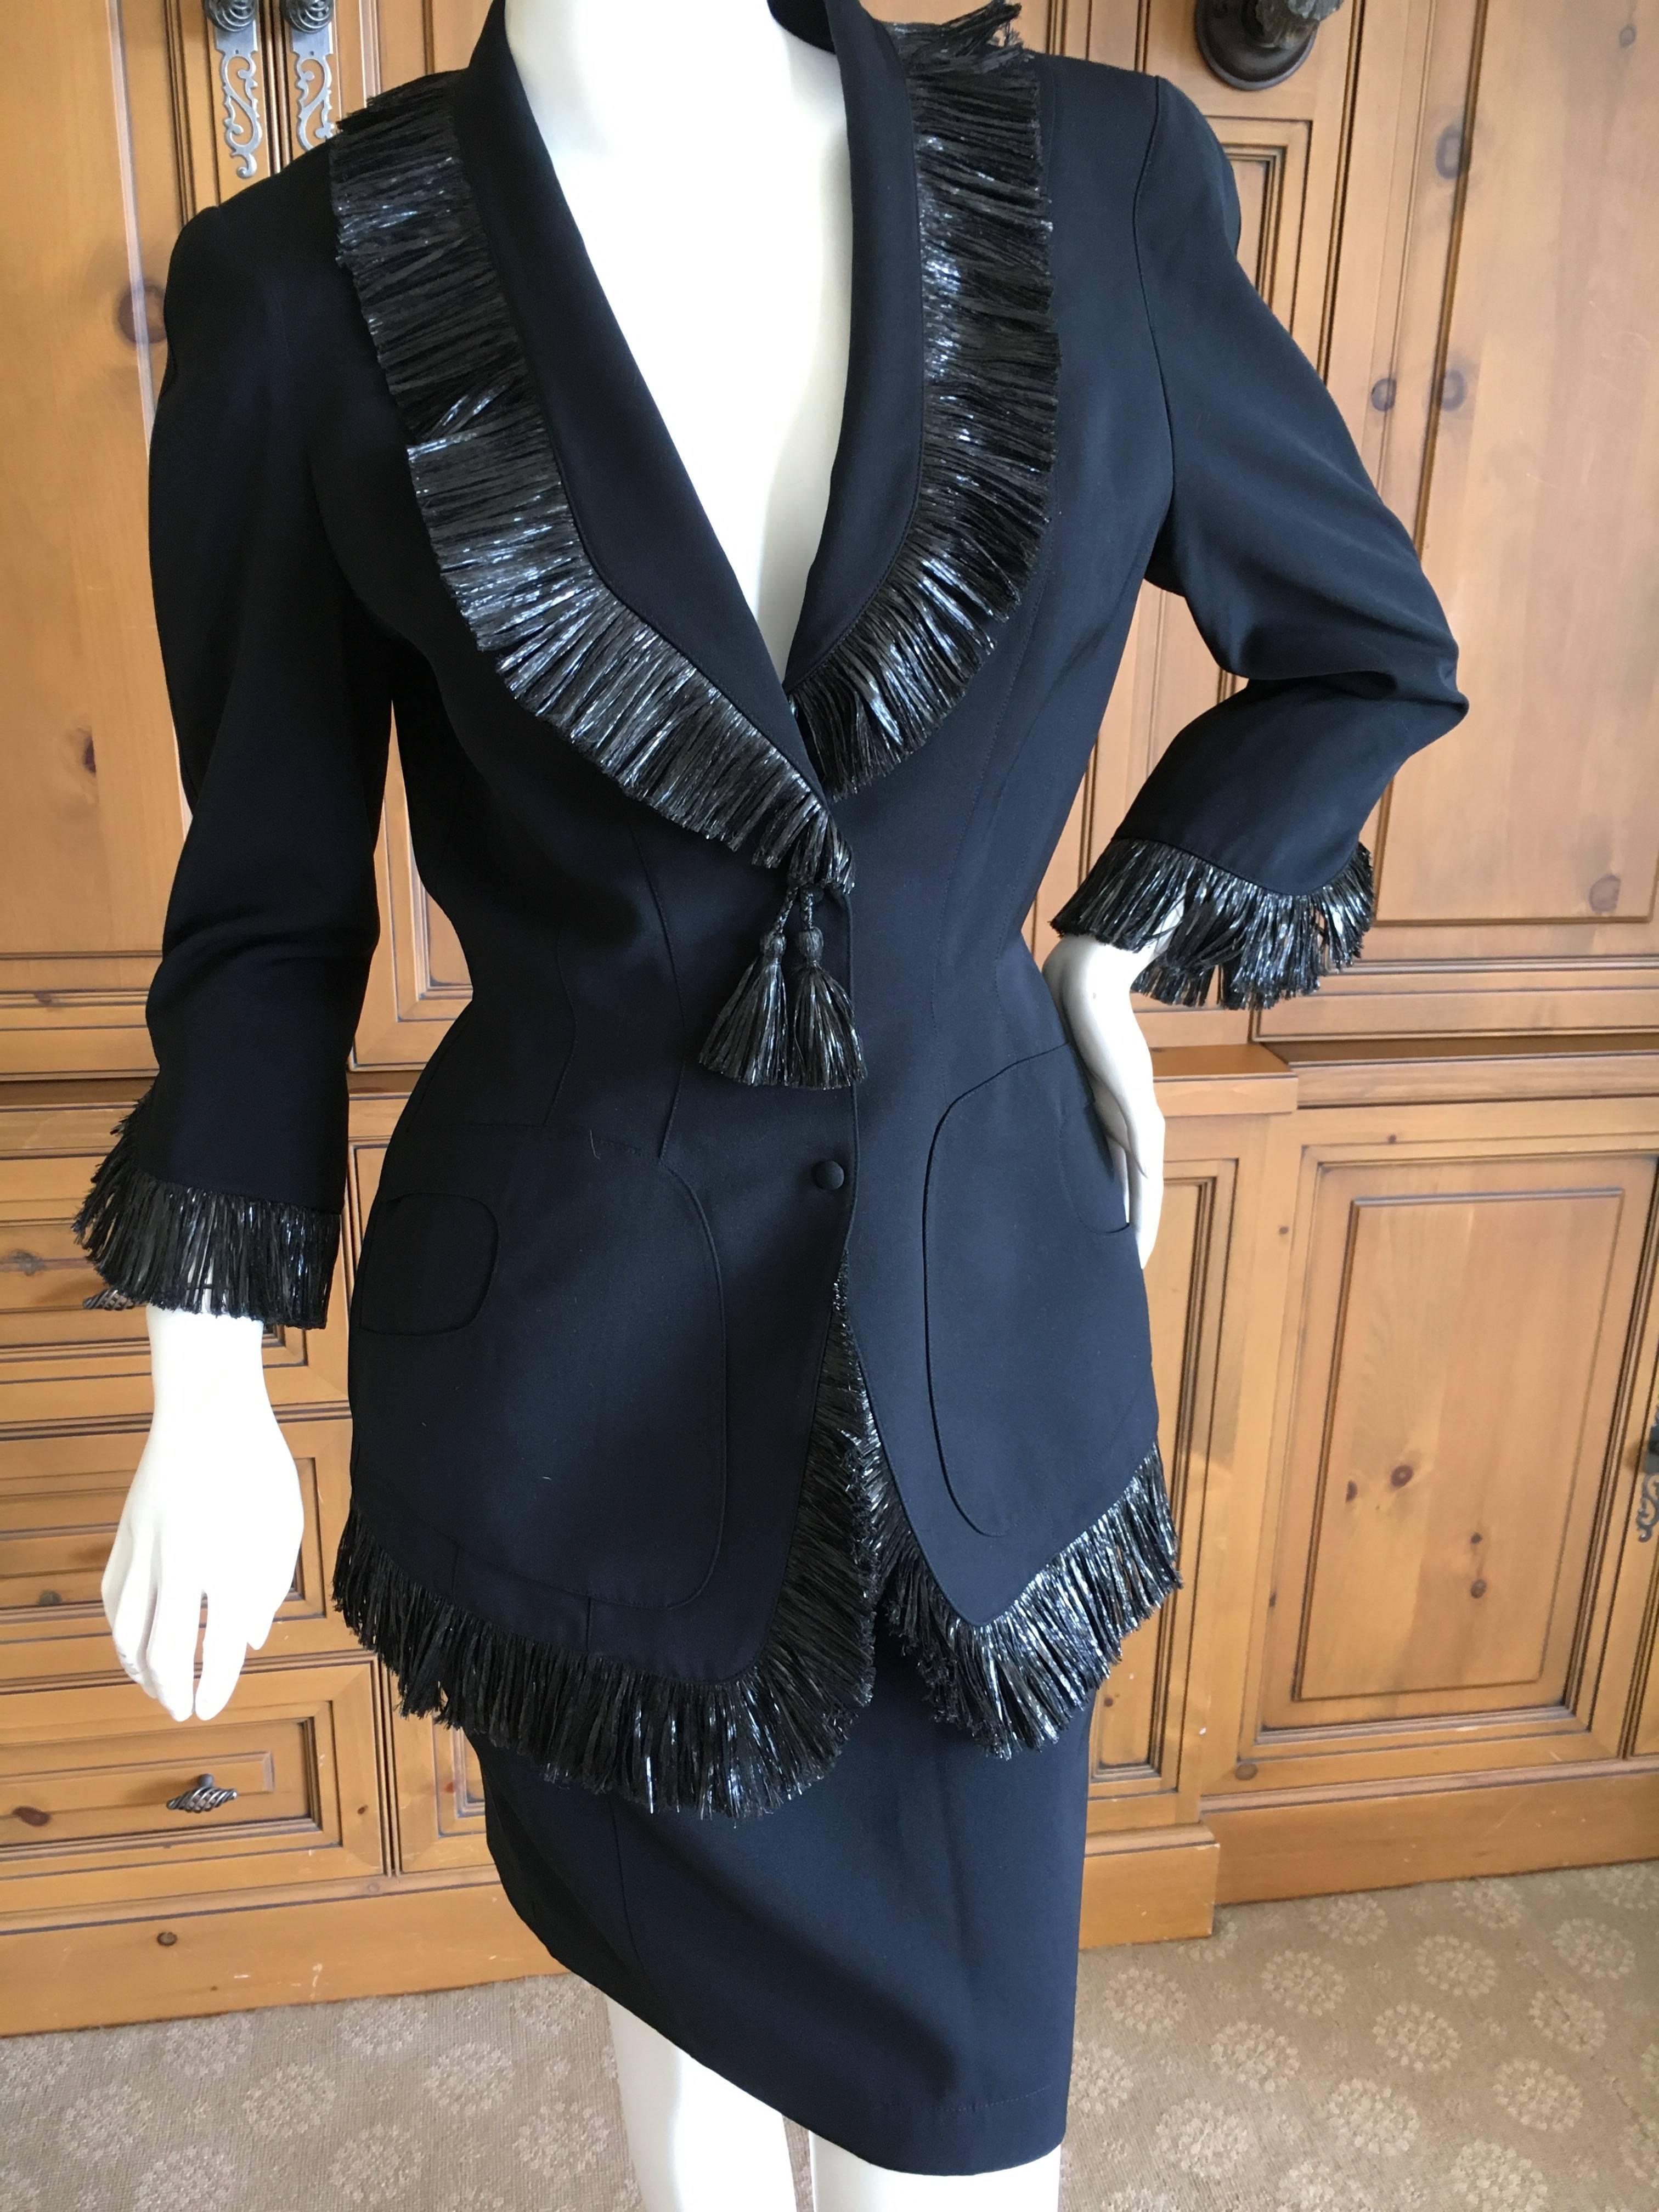 Thierry Mugler Vintage 1980's Black Suit with Raffia Fringe Tassel and Trim  In Excellent Condition For Sale In Cloverdale, CA